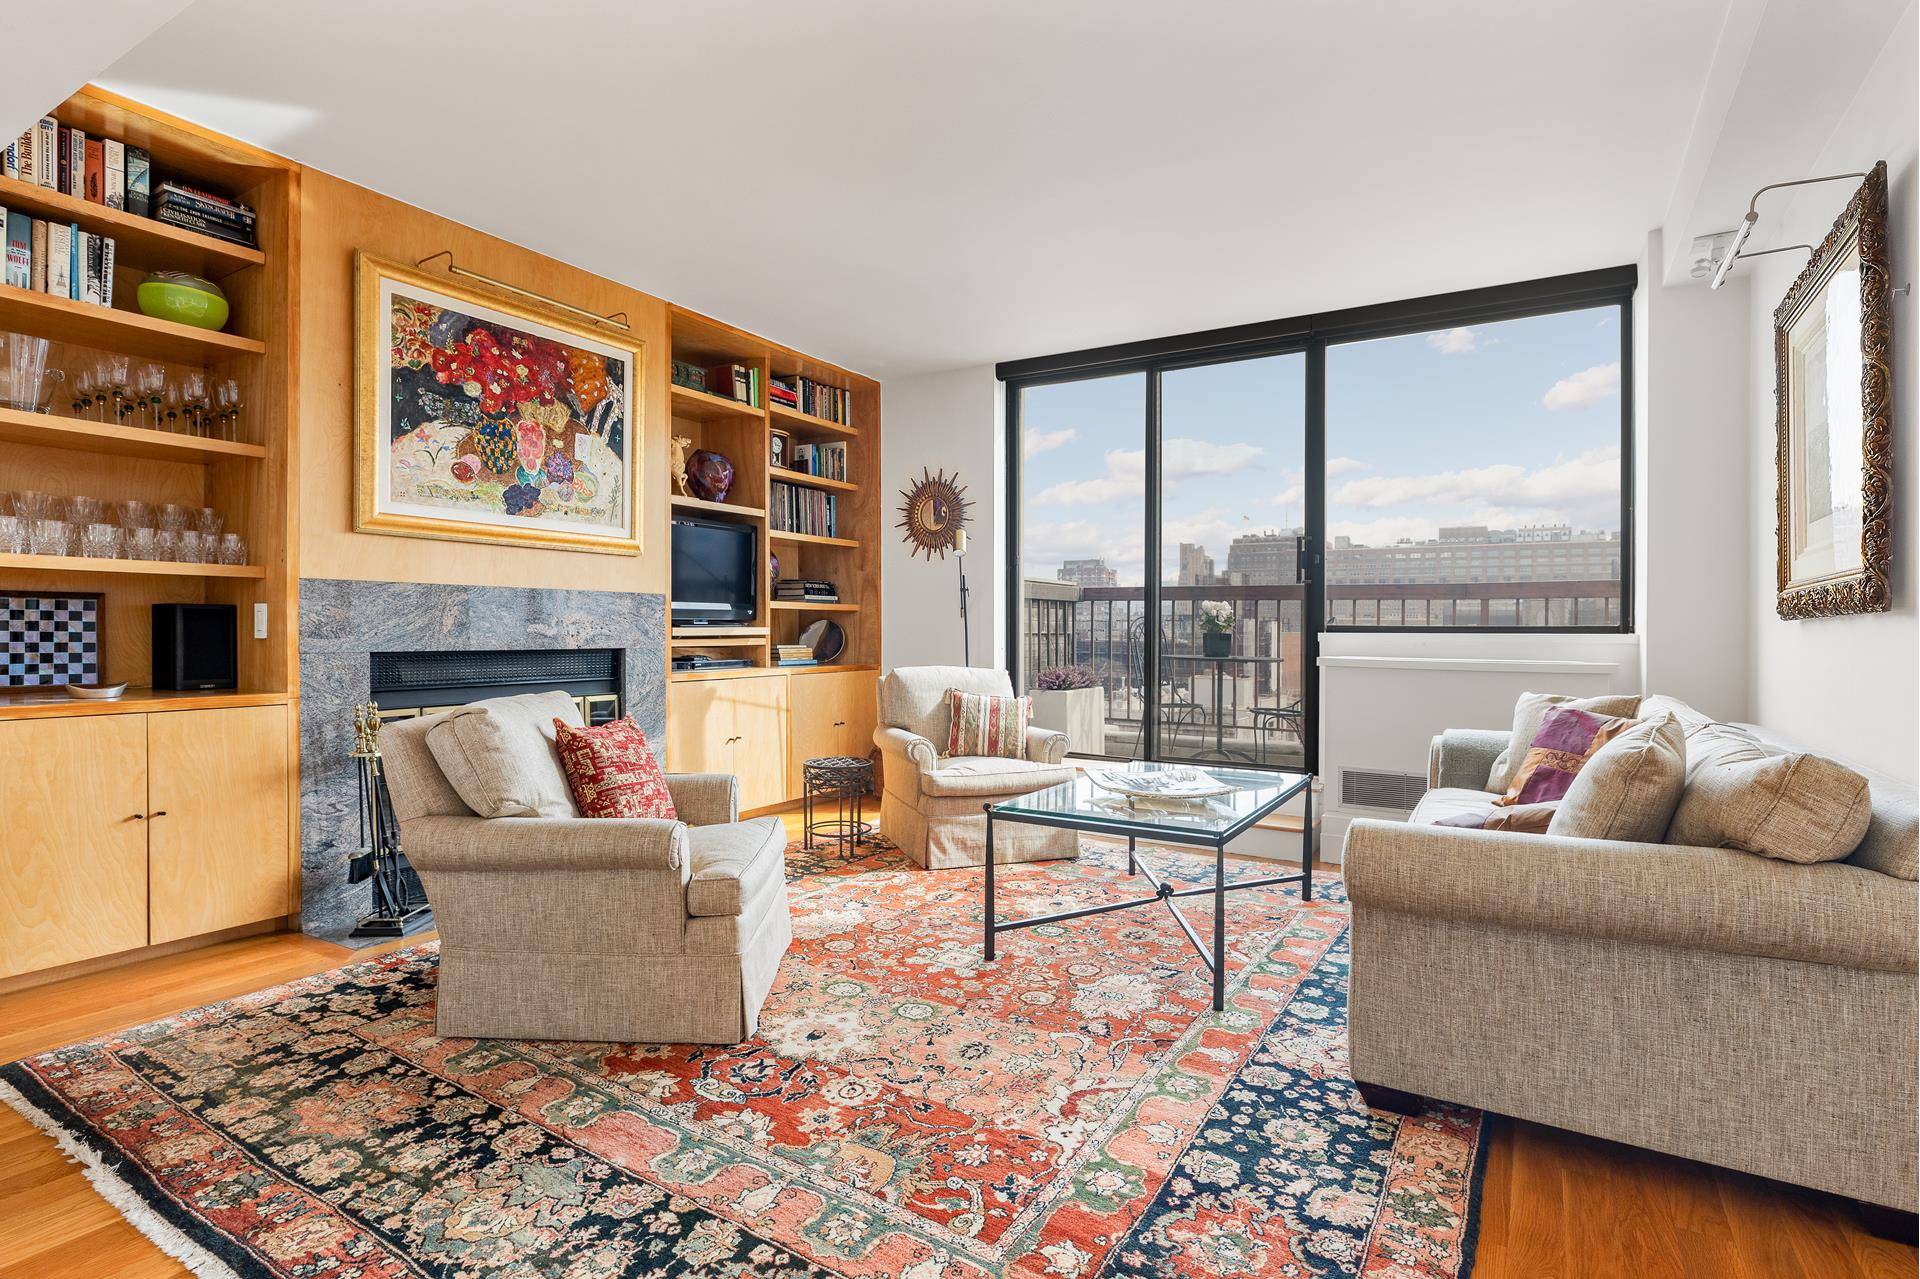 This sought after penthouse at The Cheyney is available for the first time in over 30 years.